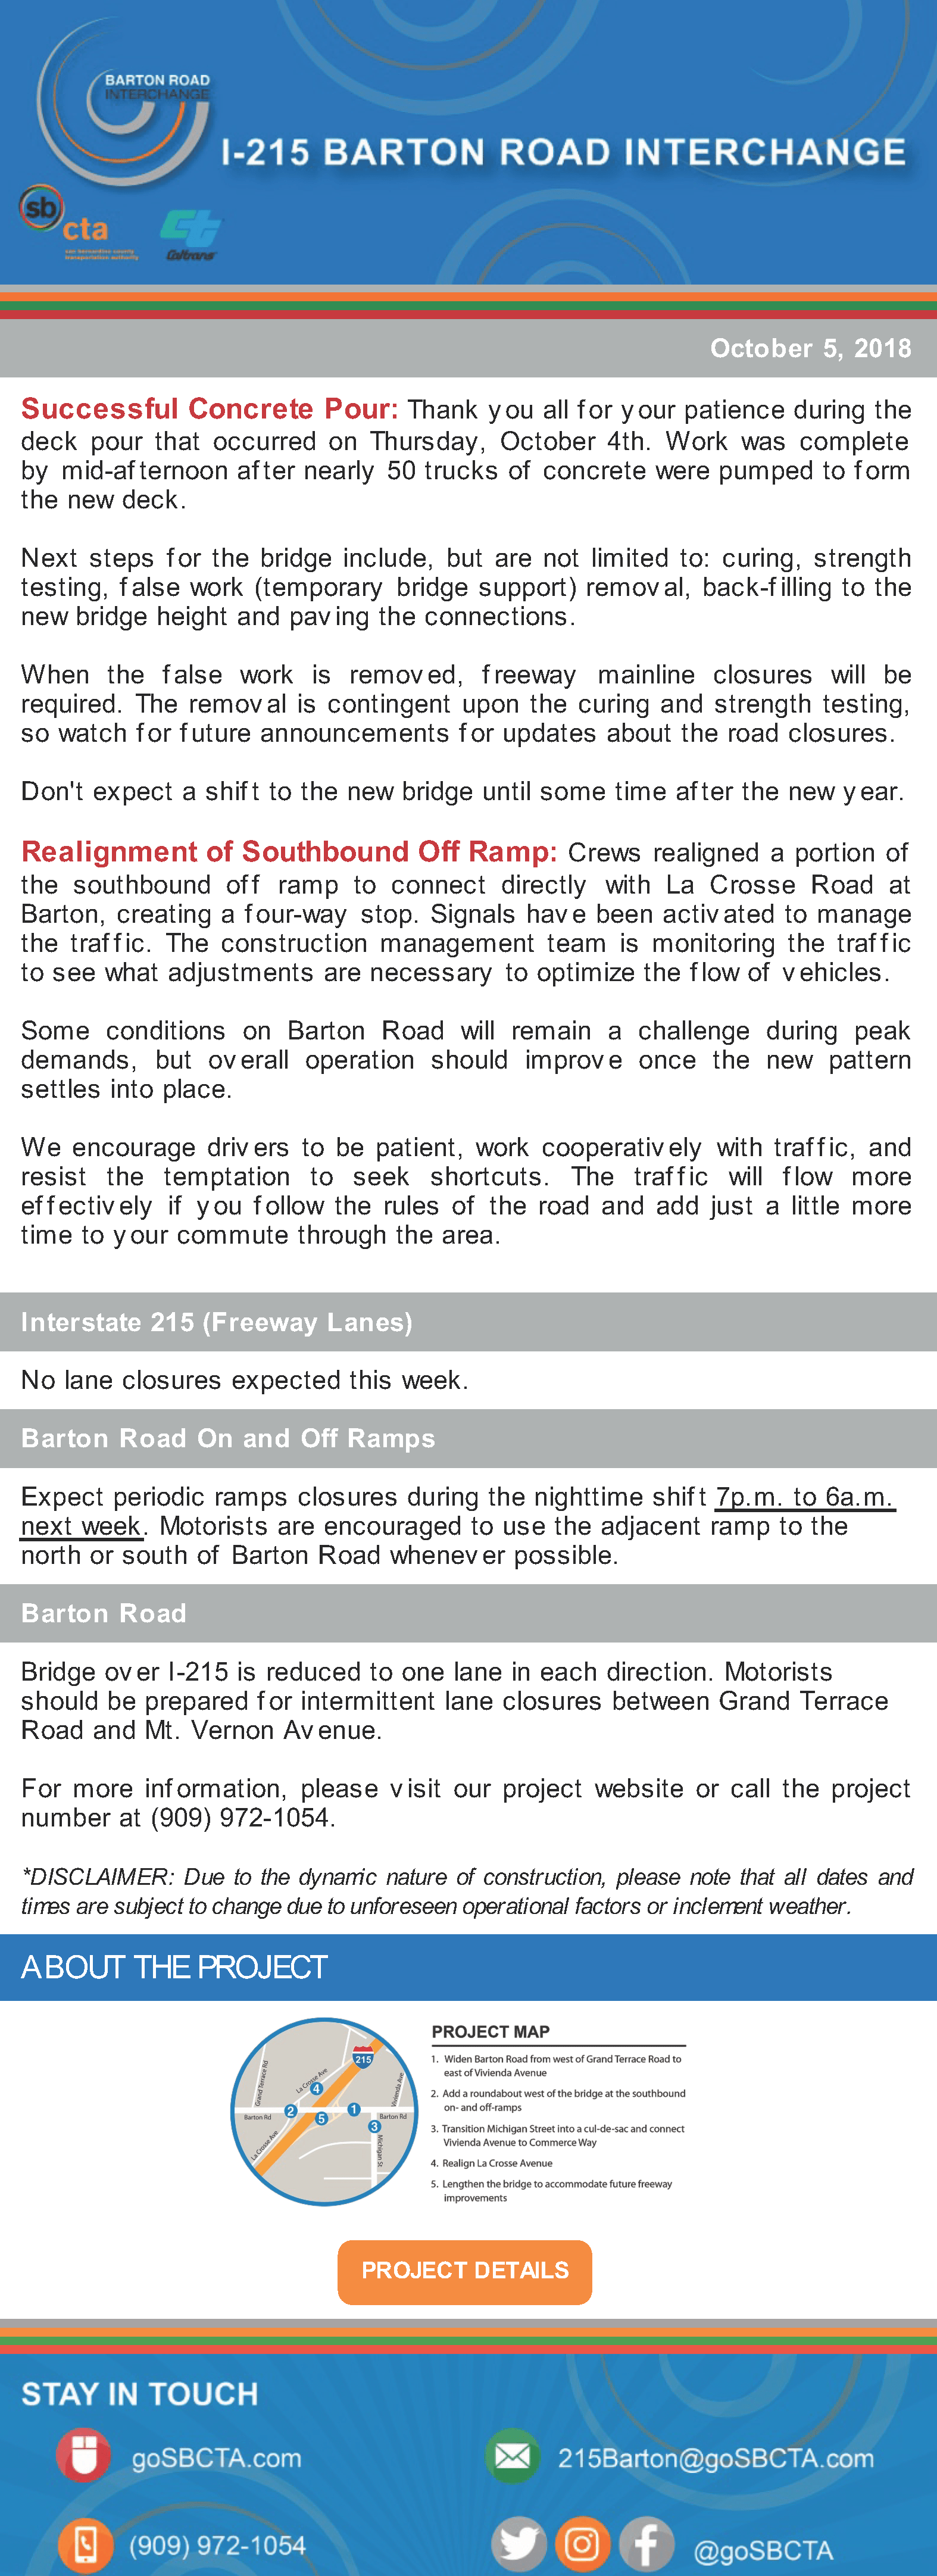 barton-road-construction-notice-week-of-october-8-e1538759004983.png